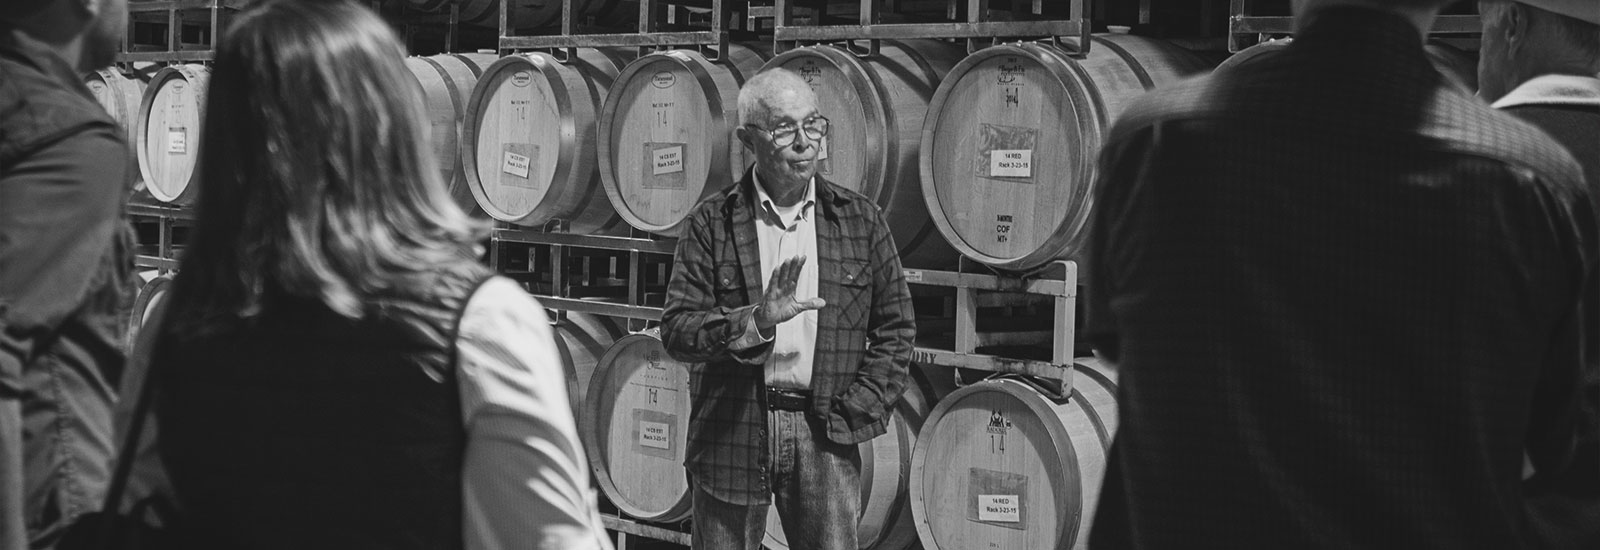 George Hendry conducting tour with stop in front of wine barrels